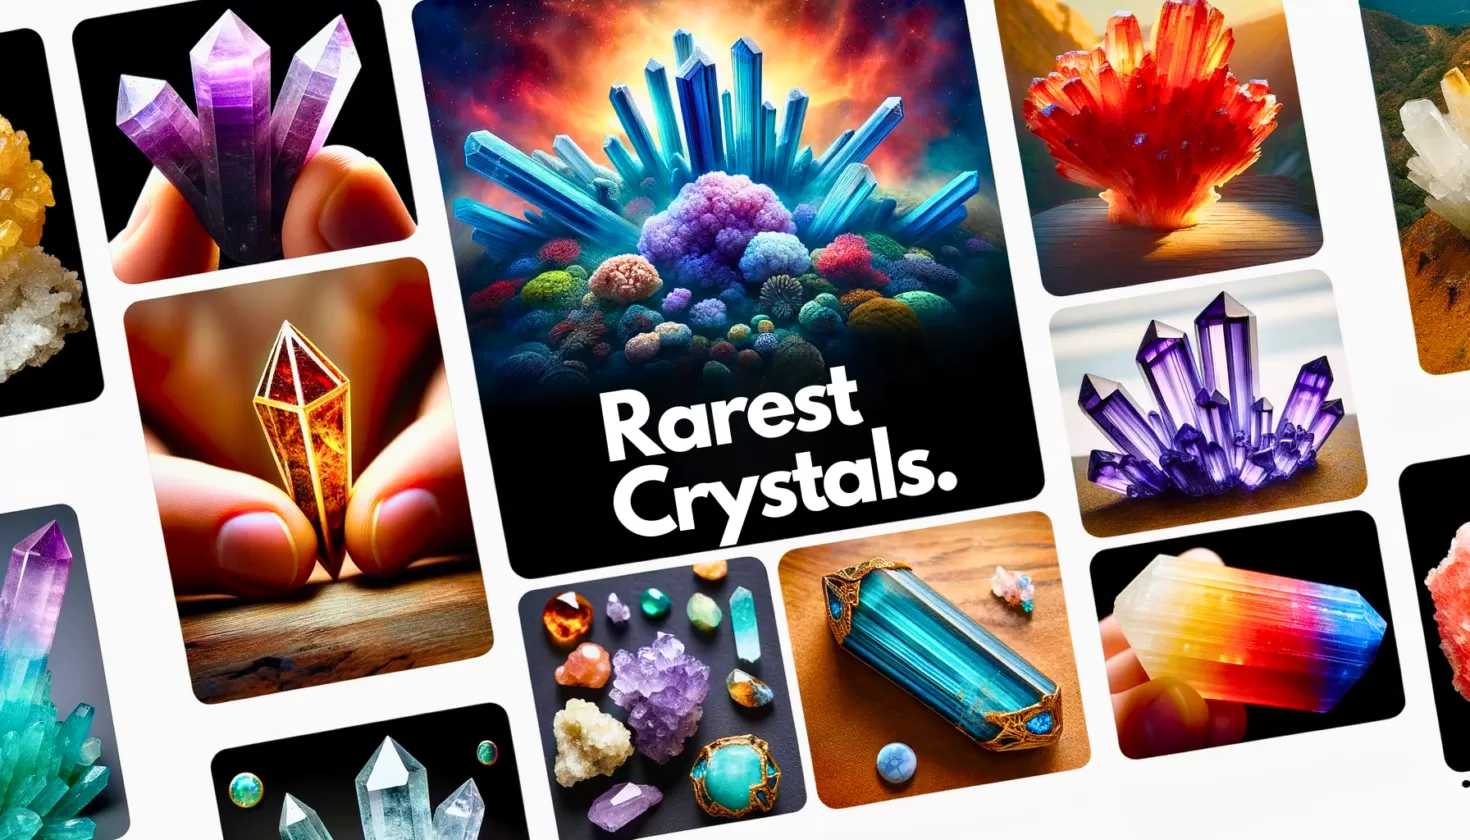 Exquisite collection of the world's rarest crystals, showcasing unique and mystical geological formations